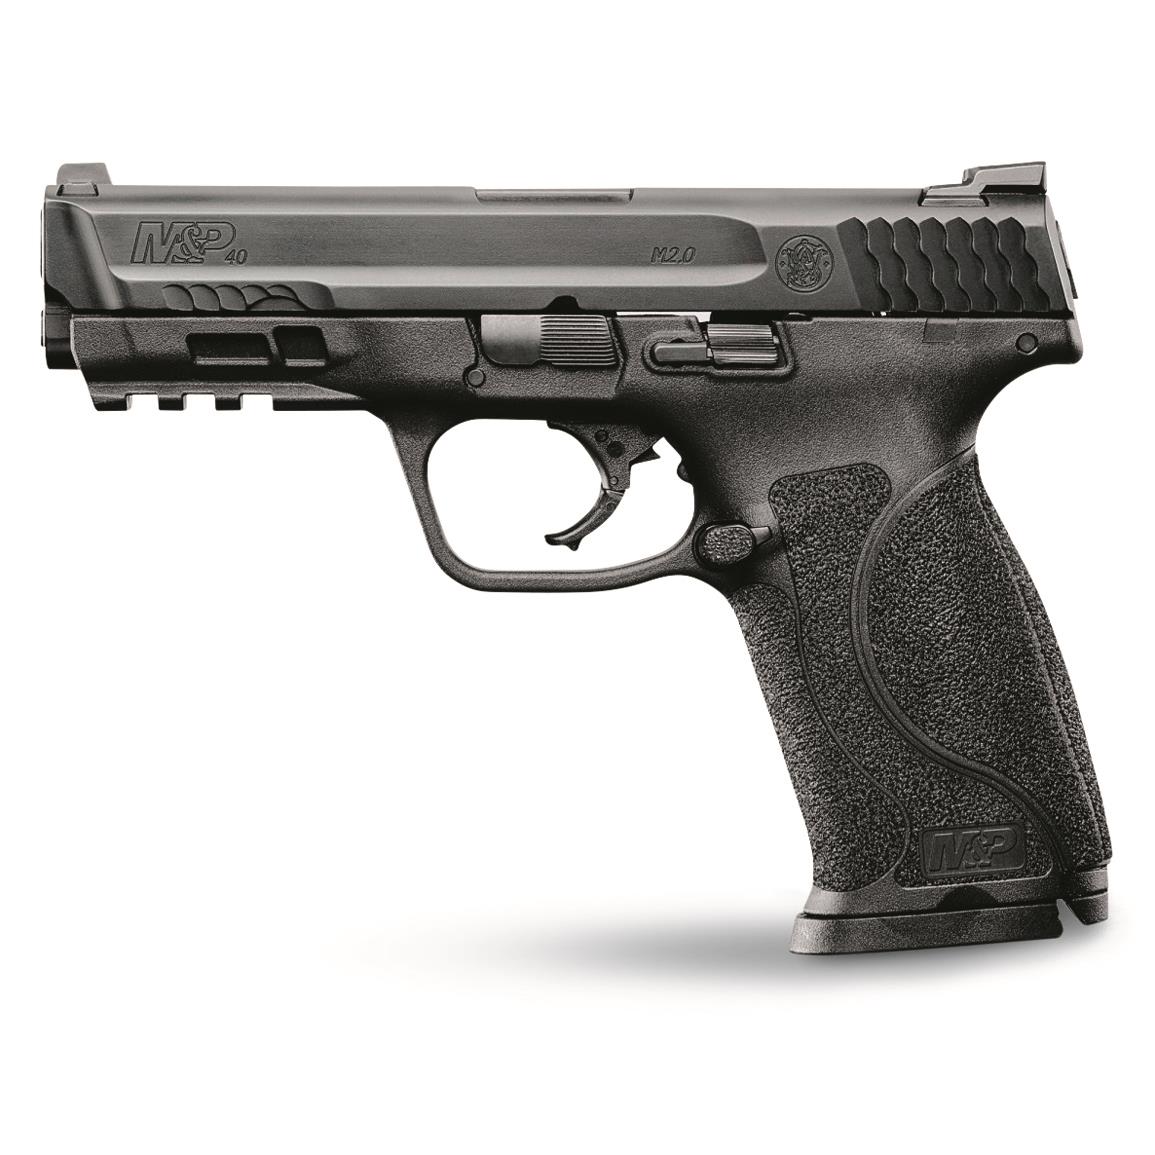 Smith & Wesson M&P40 M2.0, Semi-Automatic, .40 S&W, 4.25" Barrel, No Safety, 15+1 Rounds